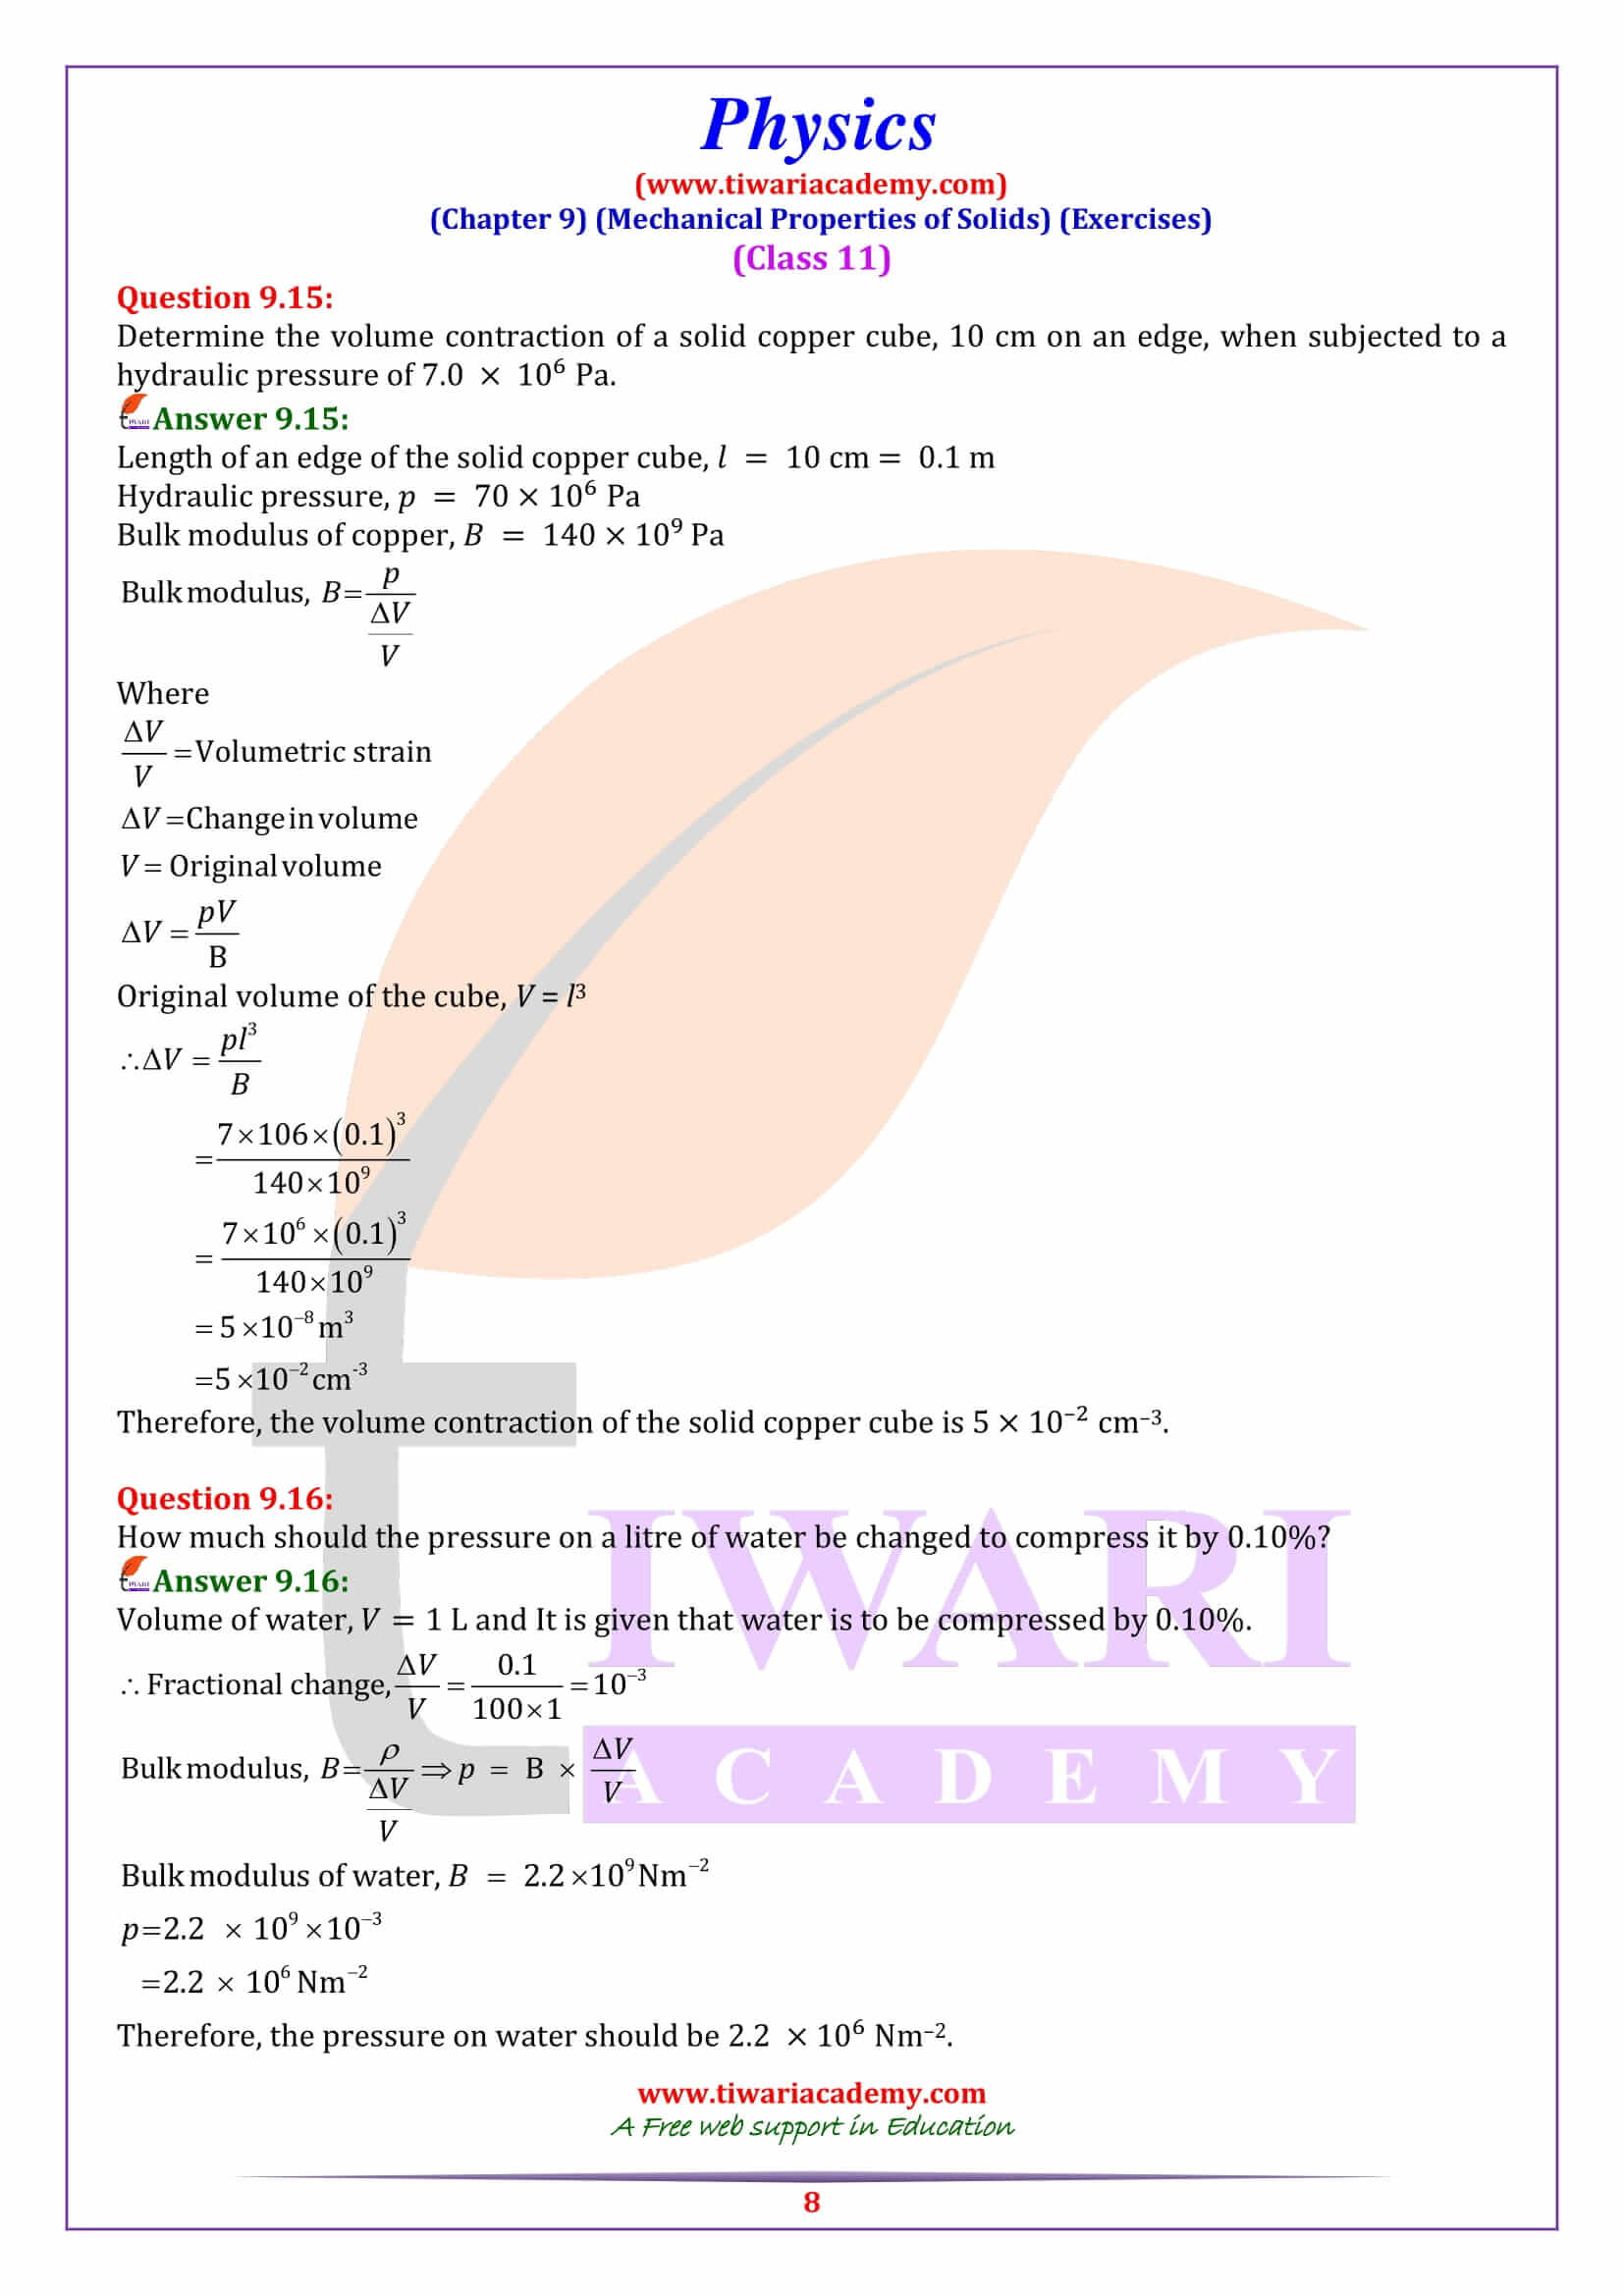 Class 11 Physics Chapter 9 exercises answers download